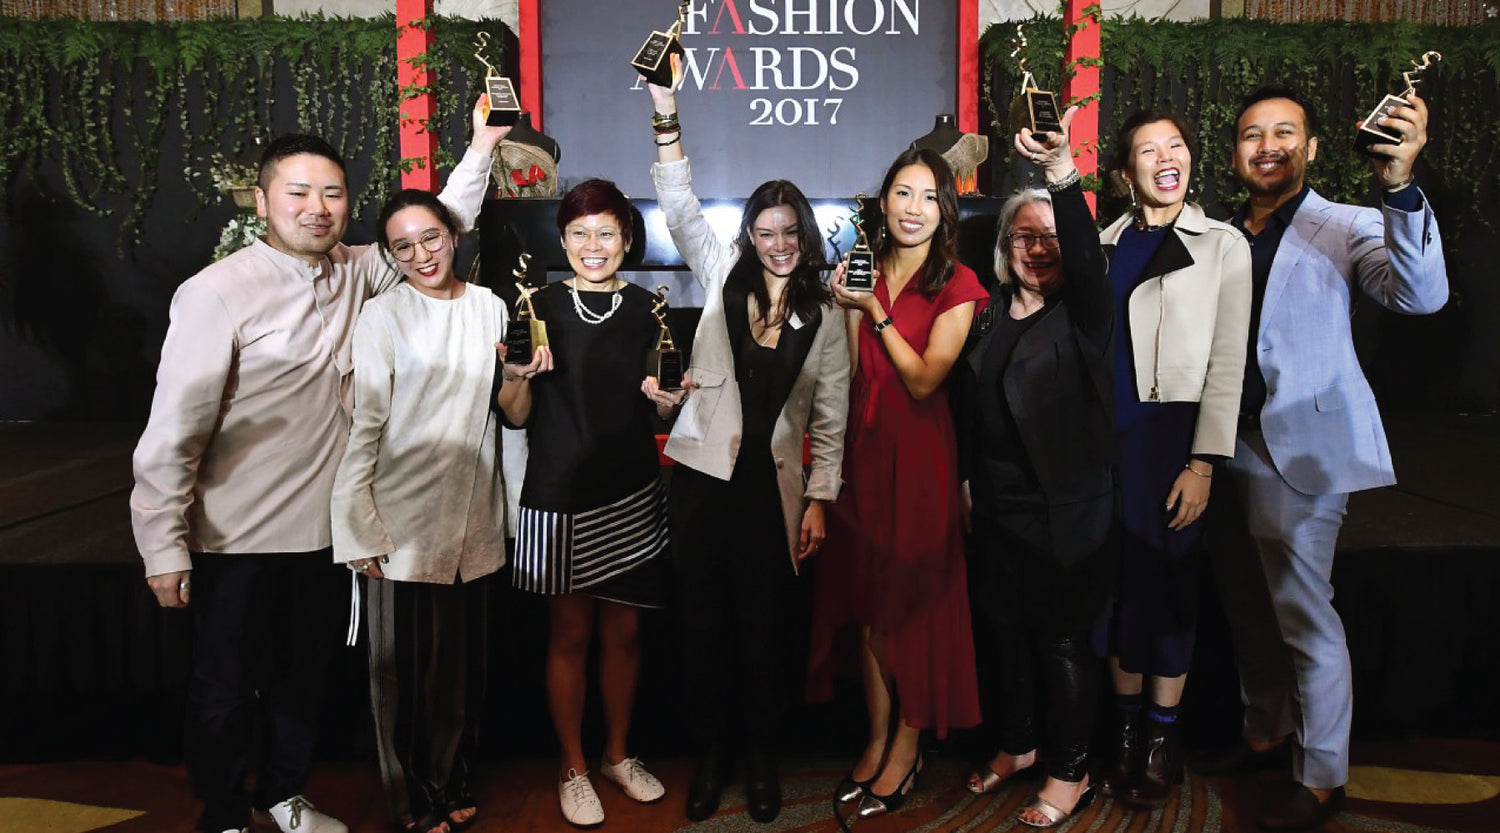 27th Nov | Local designers Dzojchen, Carrie K., State Property and more celebrated at Singapore Fashion Awards (BURO247)